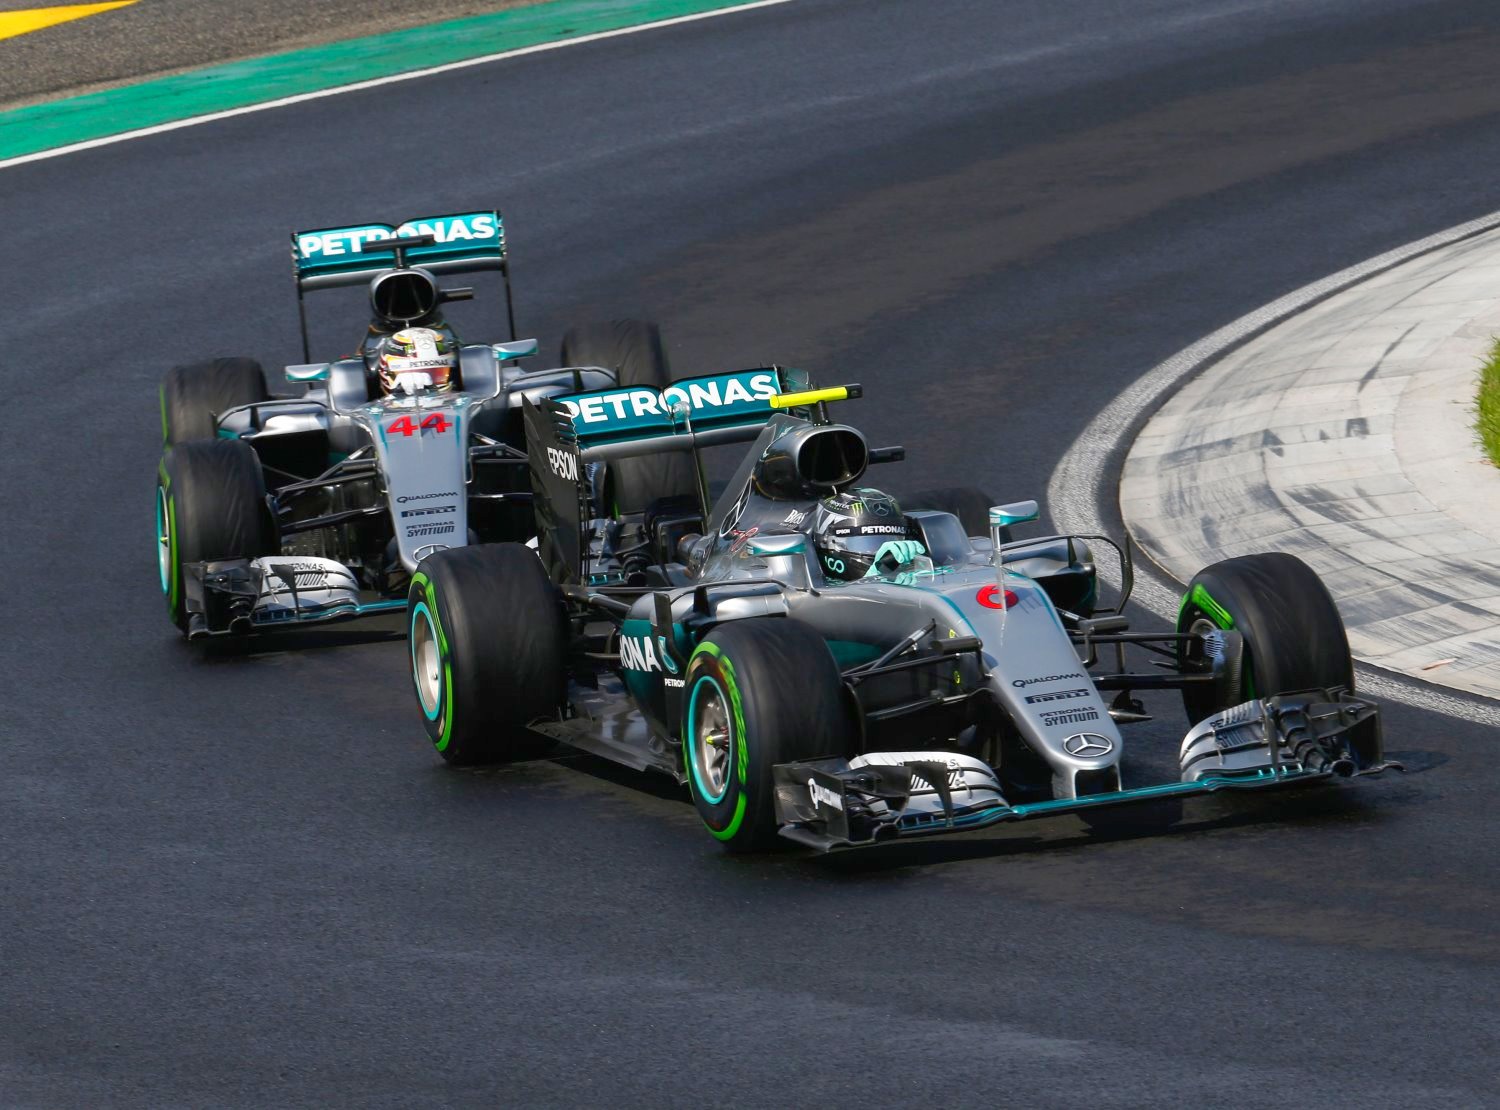 The Mercedes generate so much downforce they can run harder tires